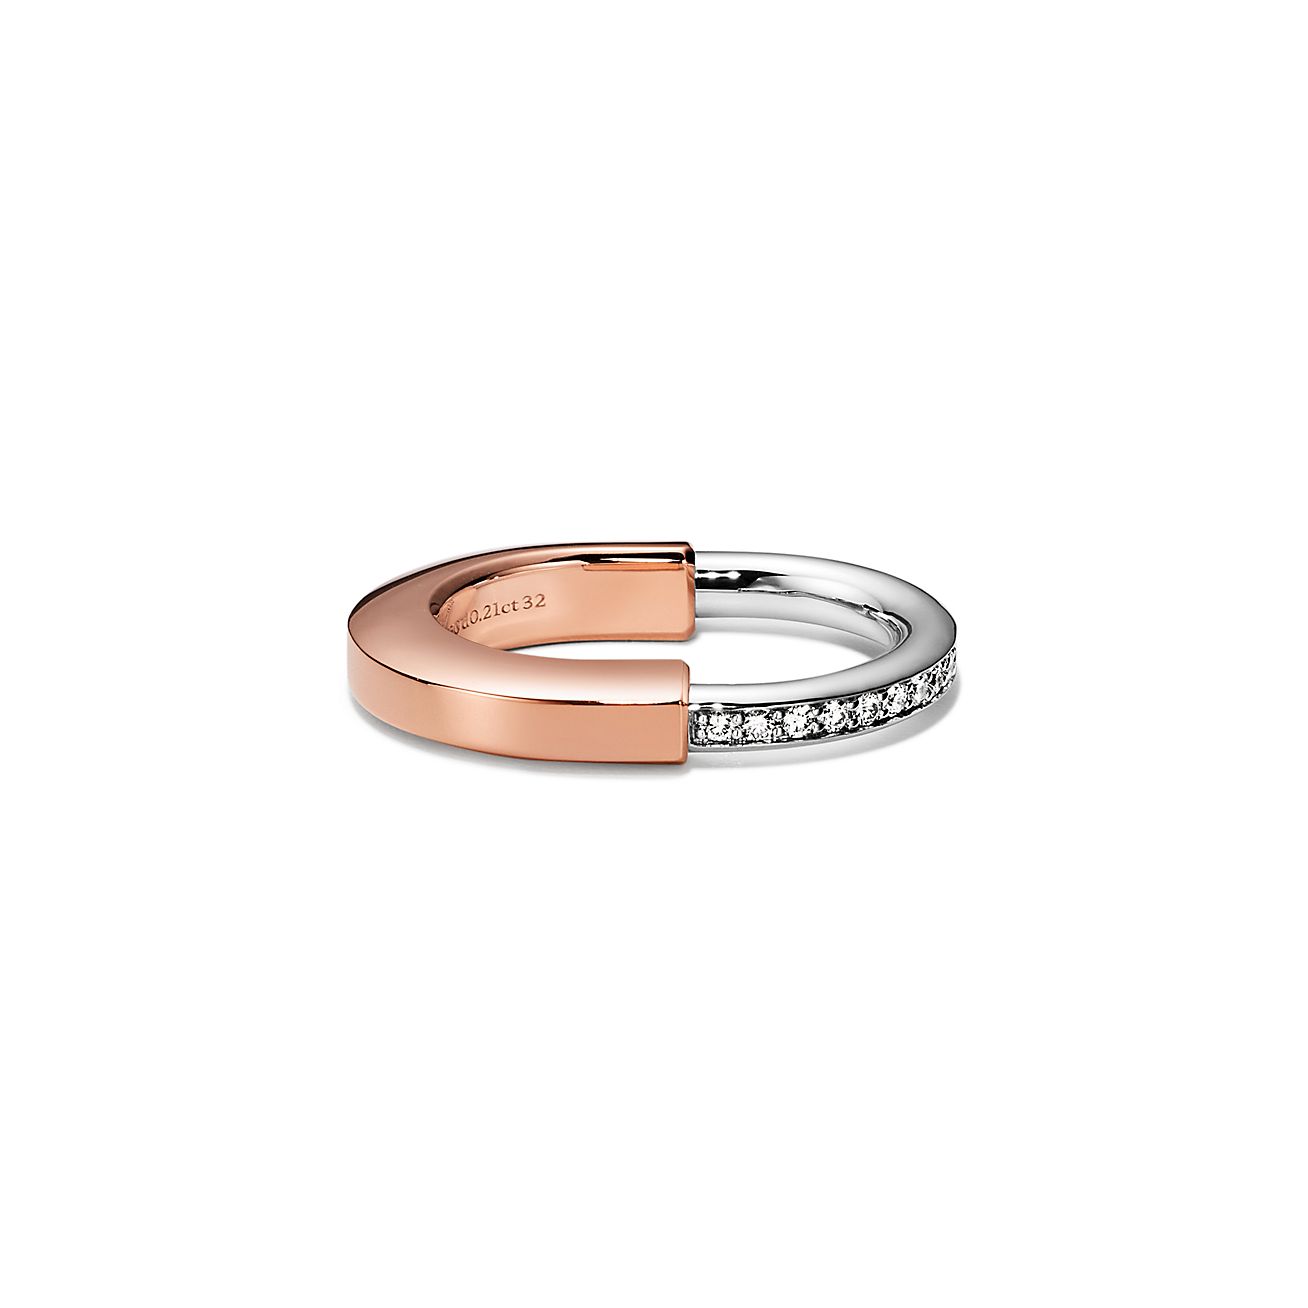 Tiffany Lock Ring in Rose and White Gold with Diamonds | Tiffany & Co.